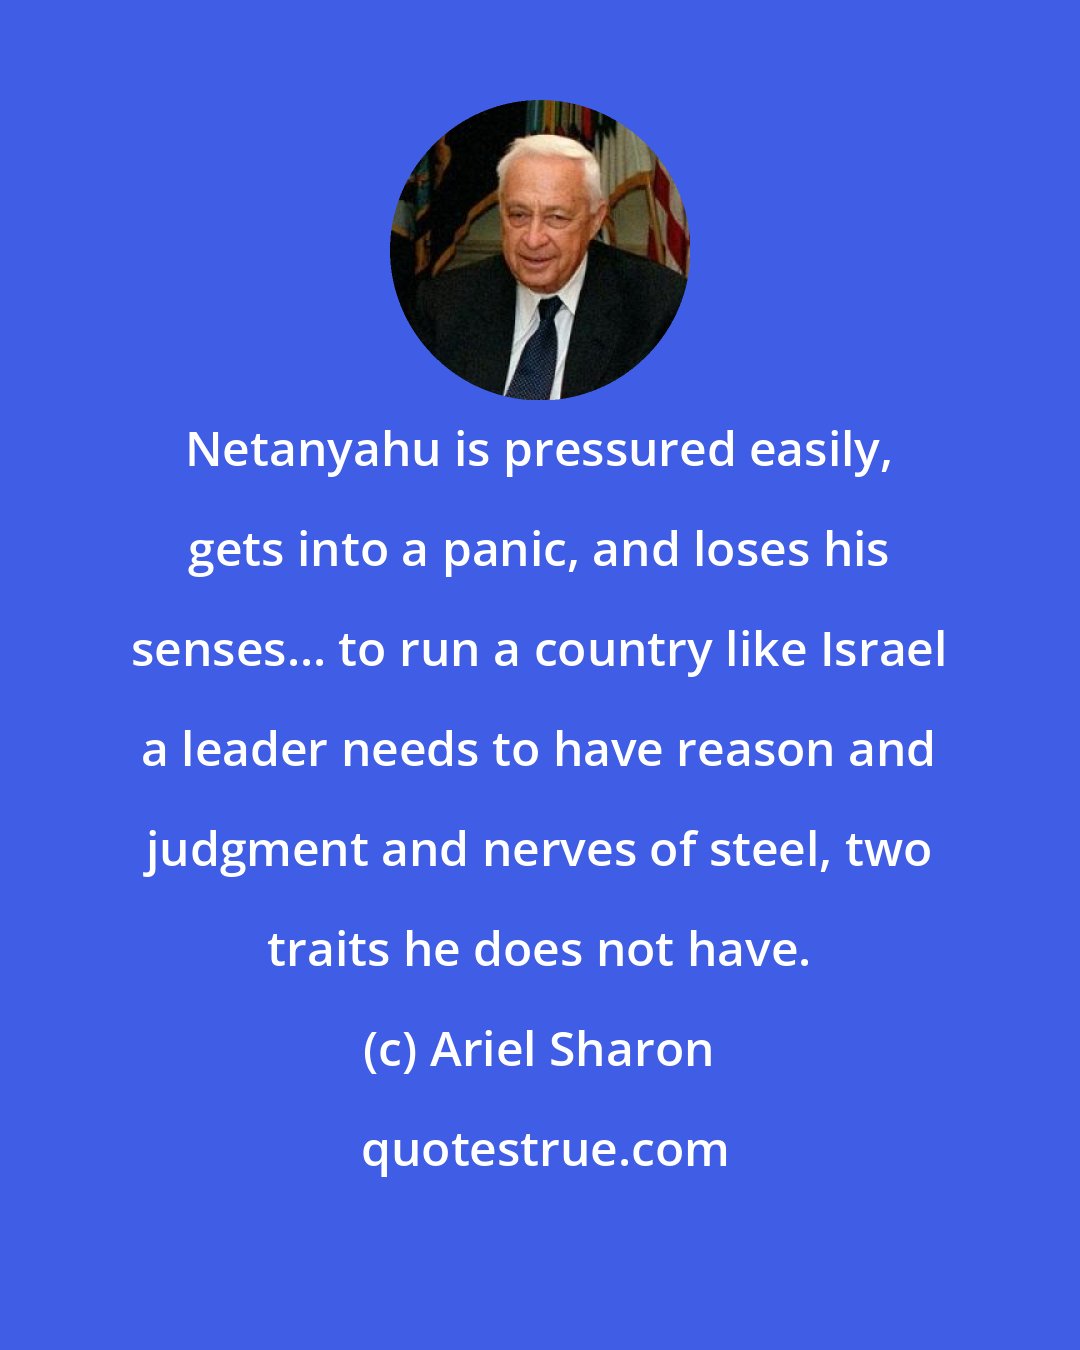 Ariel Sharon: Netanyahu is pressured easily, gets into a panic, and loses his senses... to run a country like Israel a leader needs to have reason and judgment and nerves of steel, two traits he does not have.